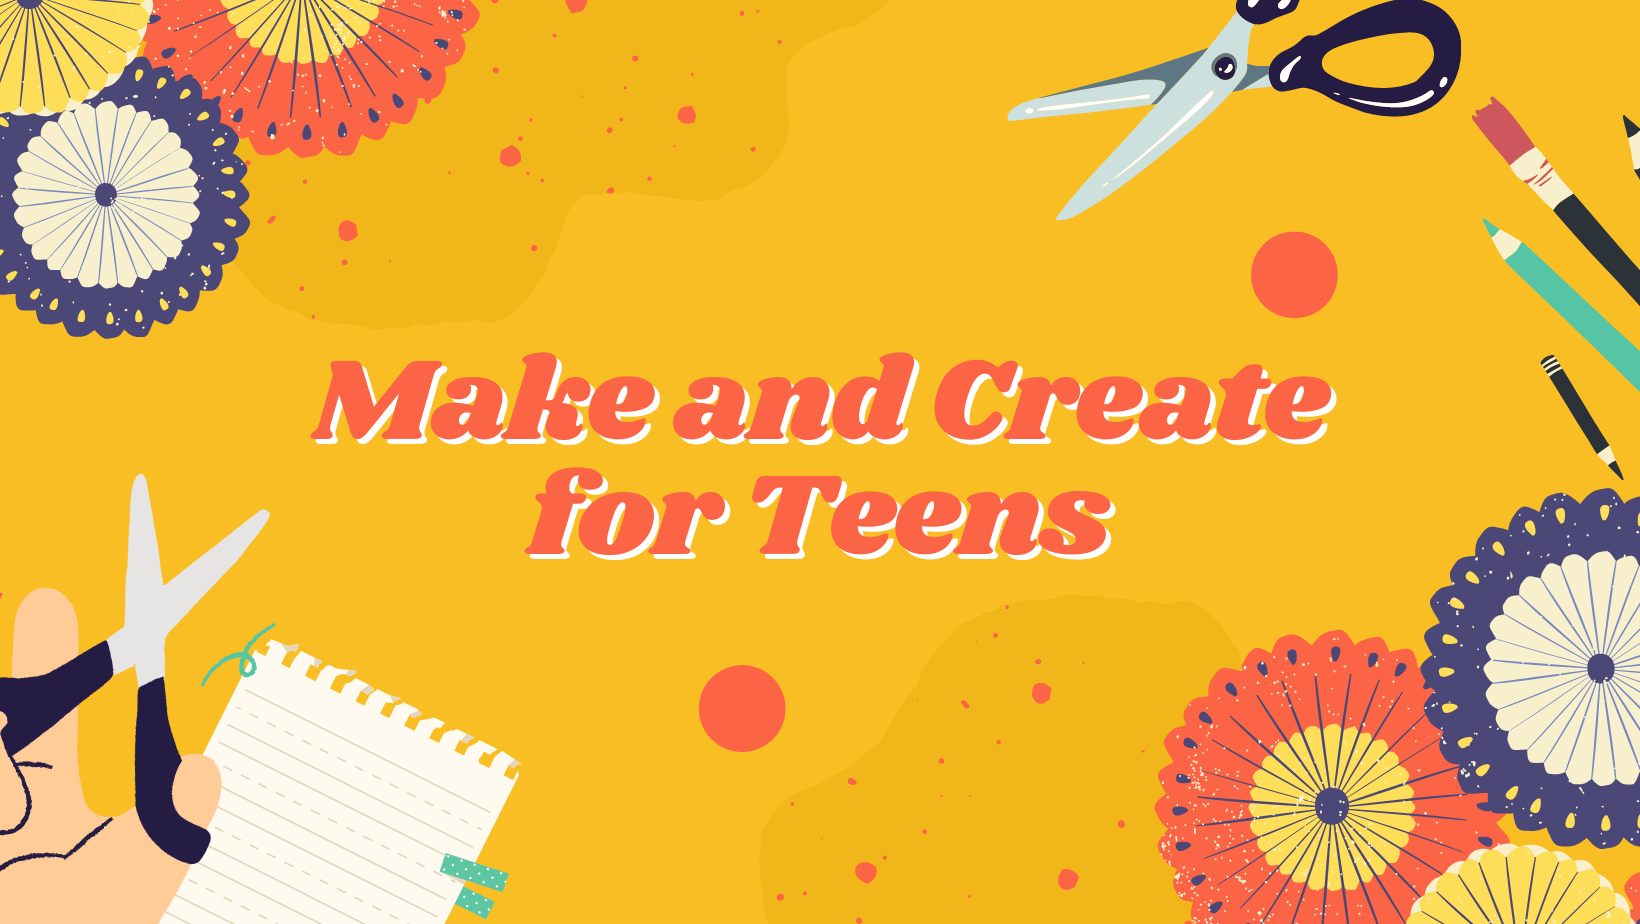 make and create for teens text on yellow background with craft supplies surrounding it